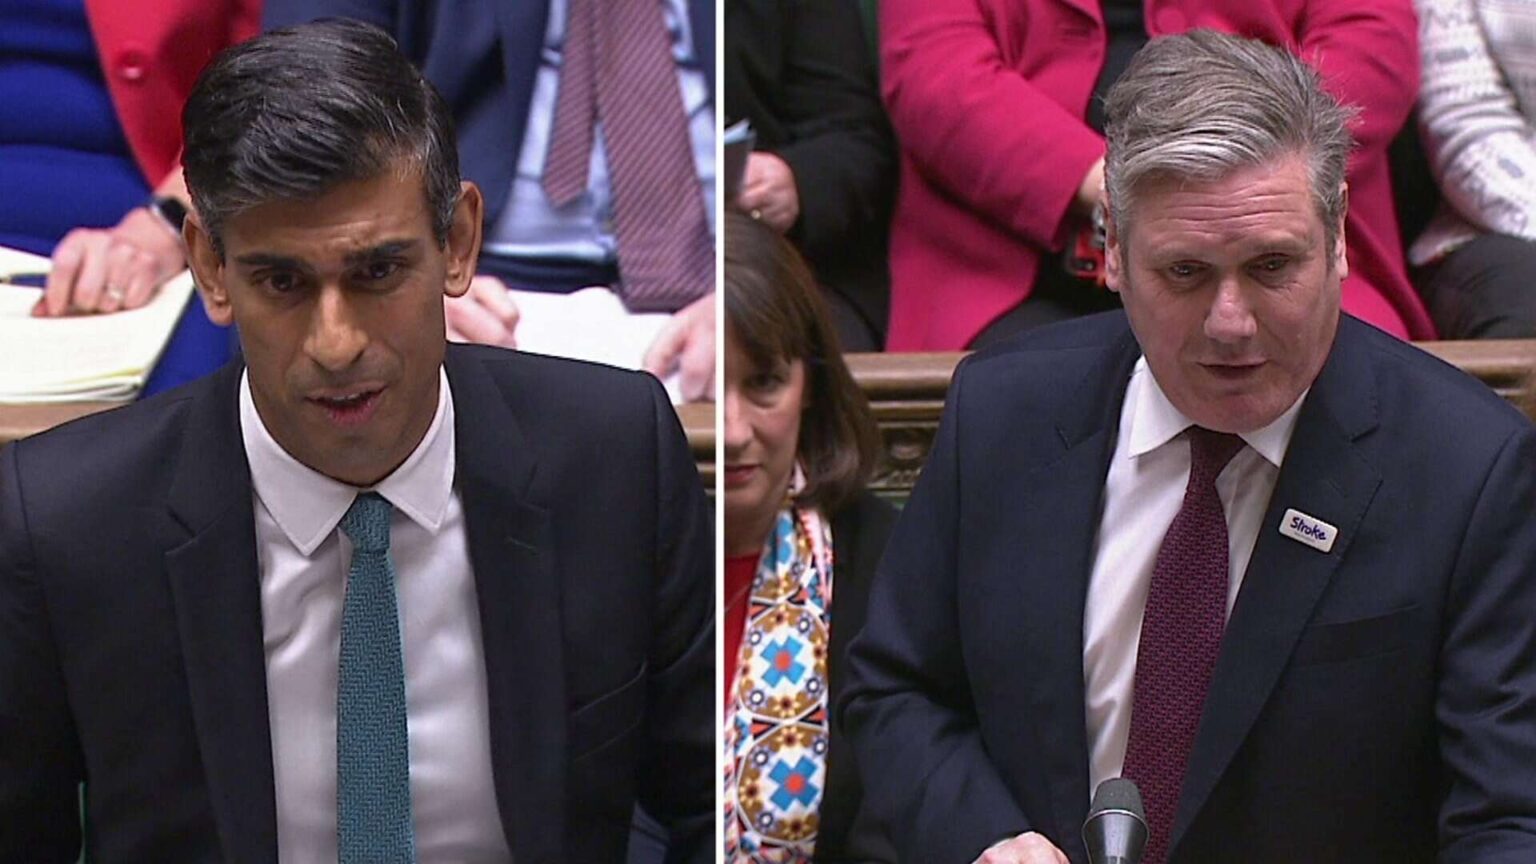 PMQs - Does the PM accept the Casey review in full?